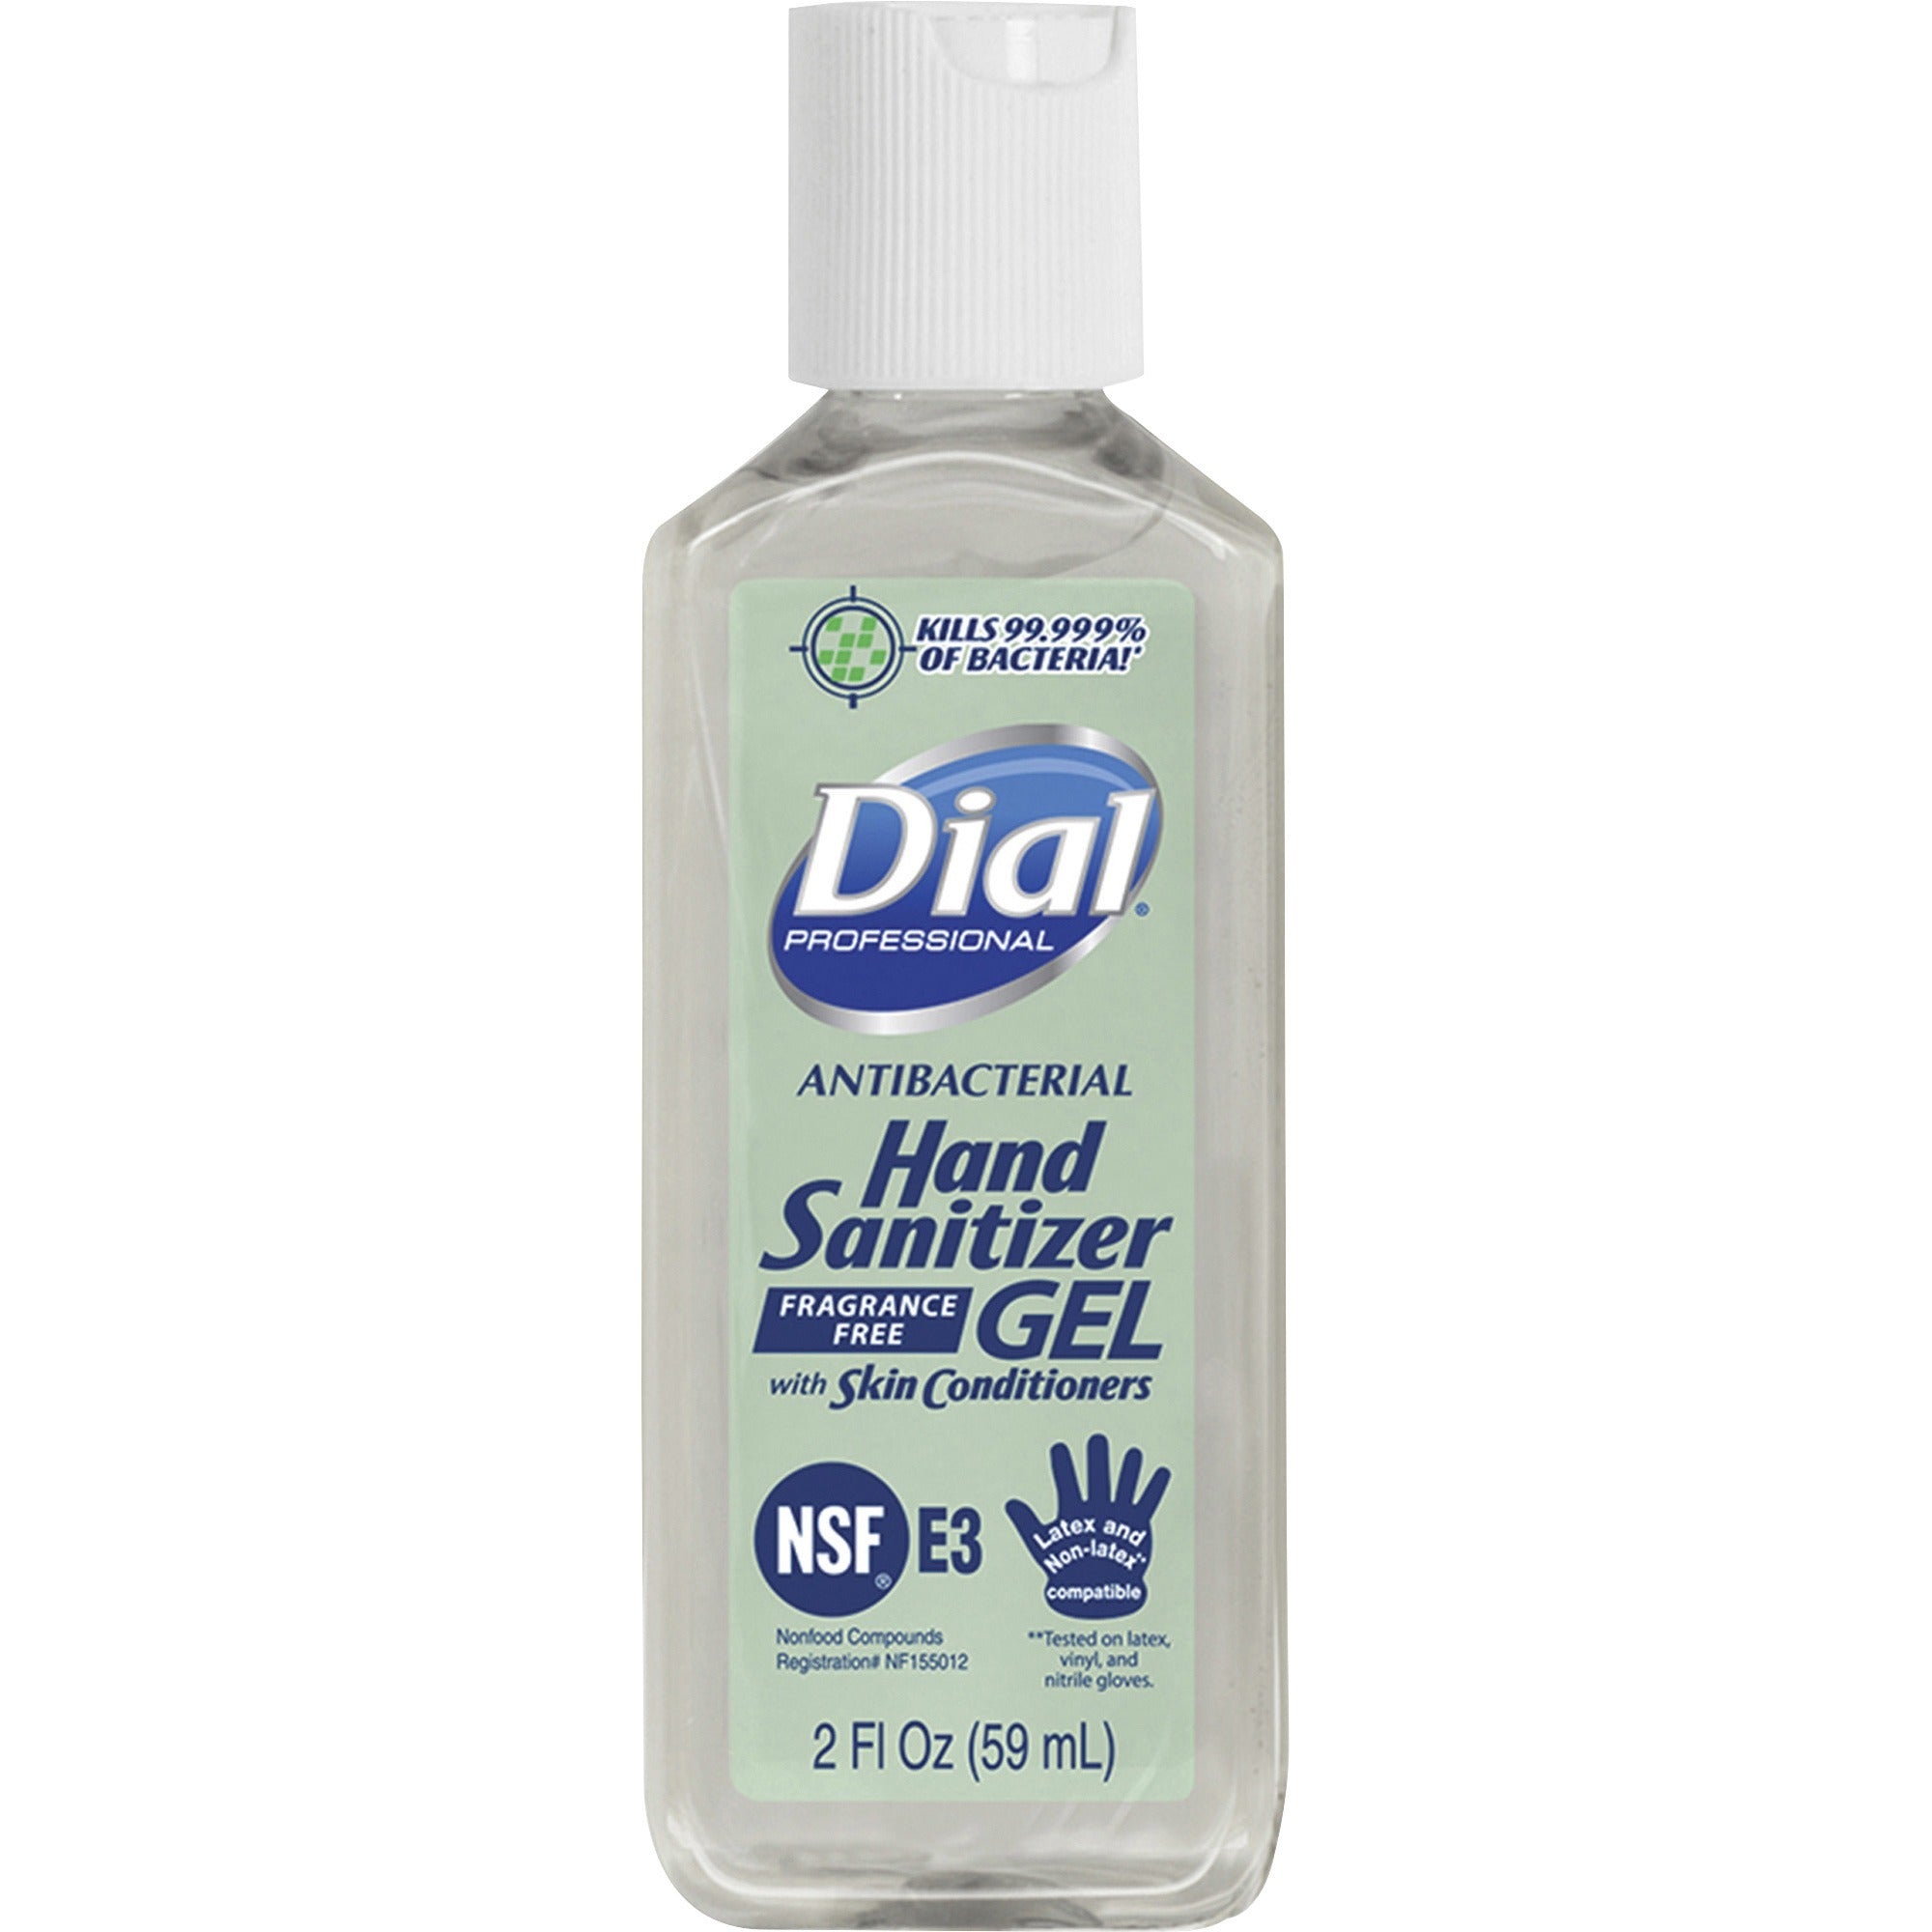 dial-hand-sanitizer-gel-fragrance-free-scent-2-fl-oz-591-ml-bacteria-remover-hand-moisturizing-clear-dye-free-1-each_dia31859 - 1